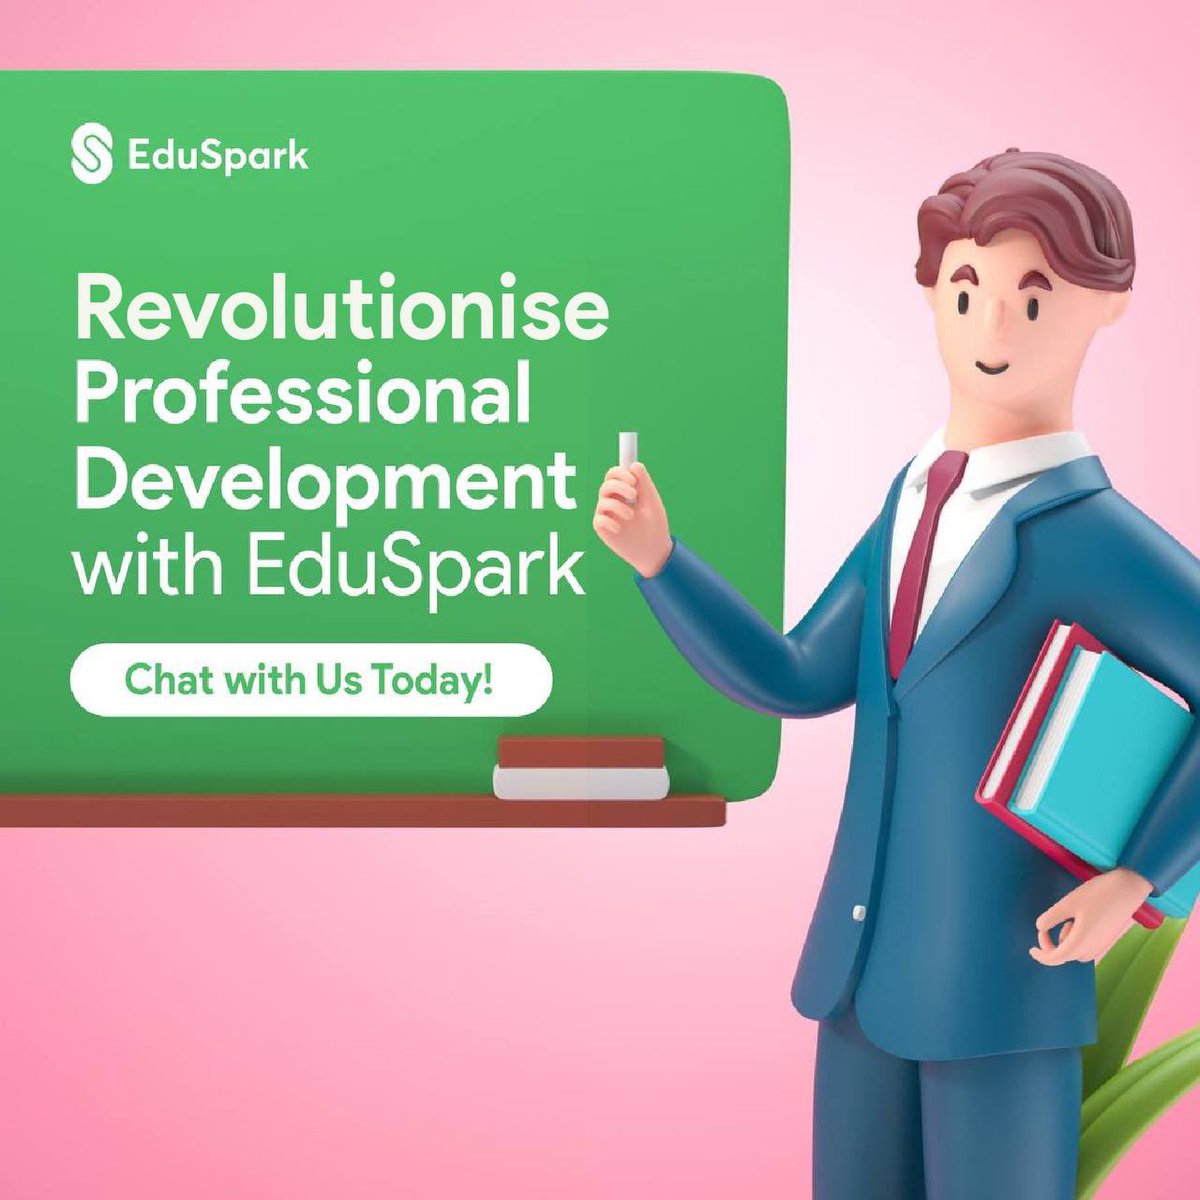 Revolutionize your school's PD with EduSpark! Say goodbye to stress and budget worries. Ready to transform your learning next year? Let's chat! Discover how EduSpark supports schools worldwide! 🌏💬 #ProfessionalDevelopment #EduSpark